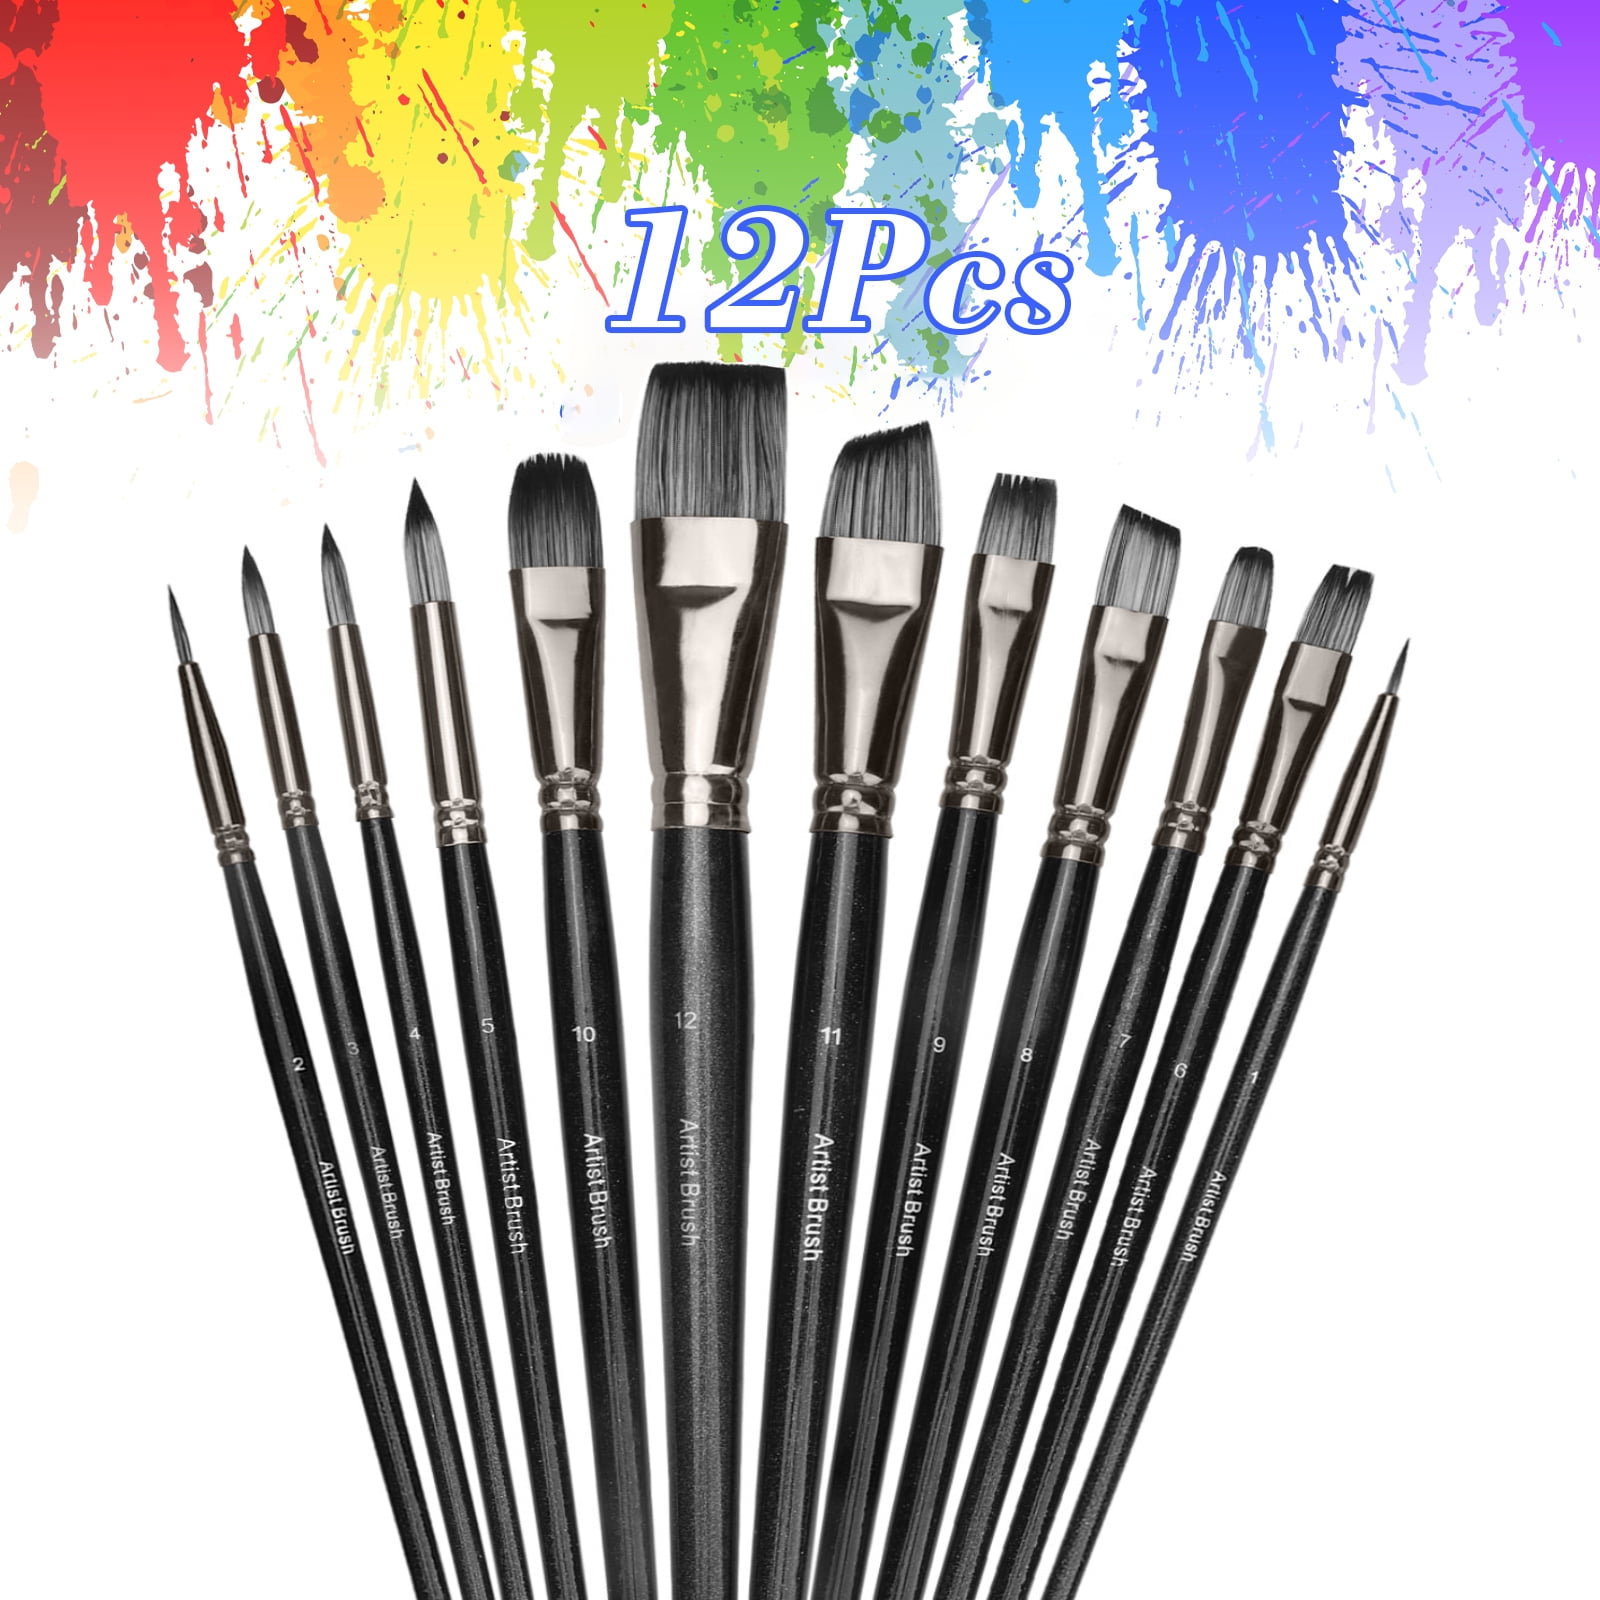 10 Paint Brushes You NEED For Acrylic and Oil Painting – Chuck Black Art